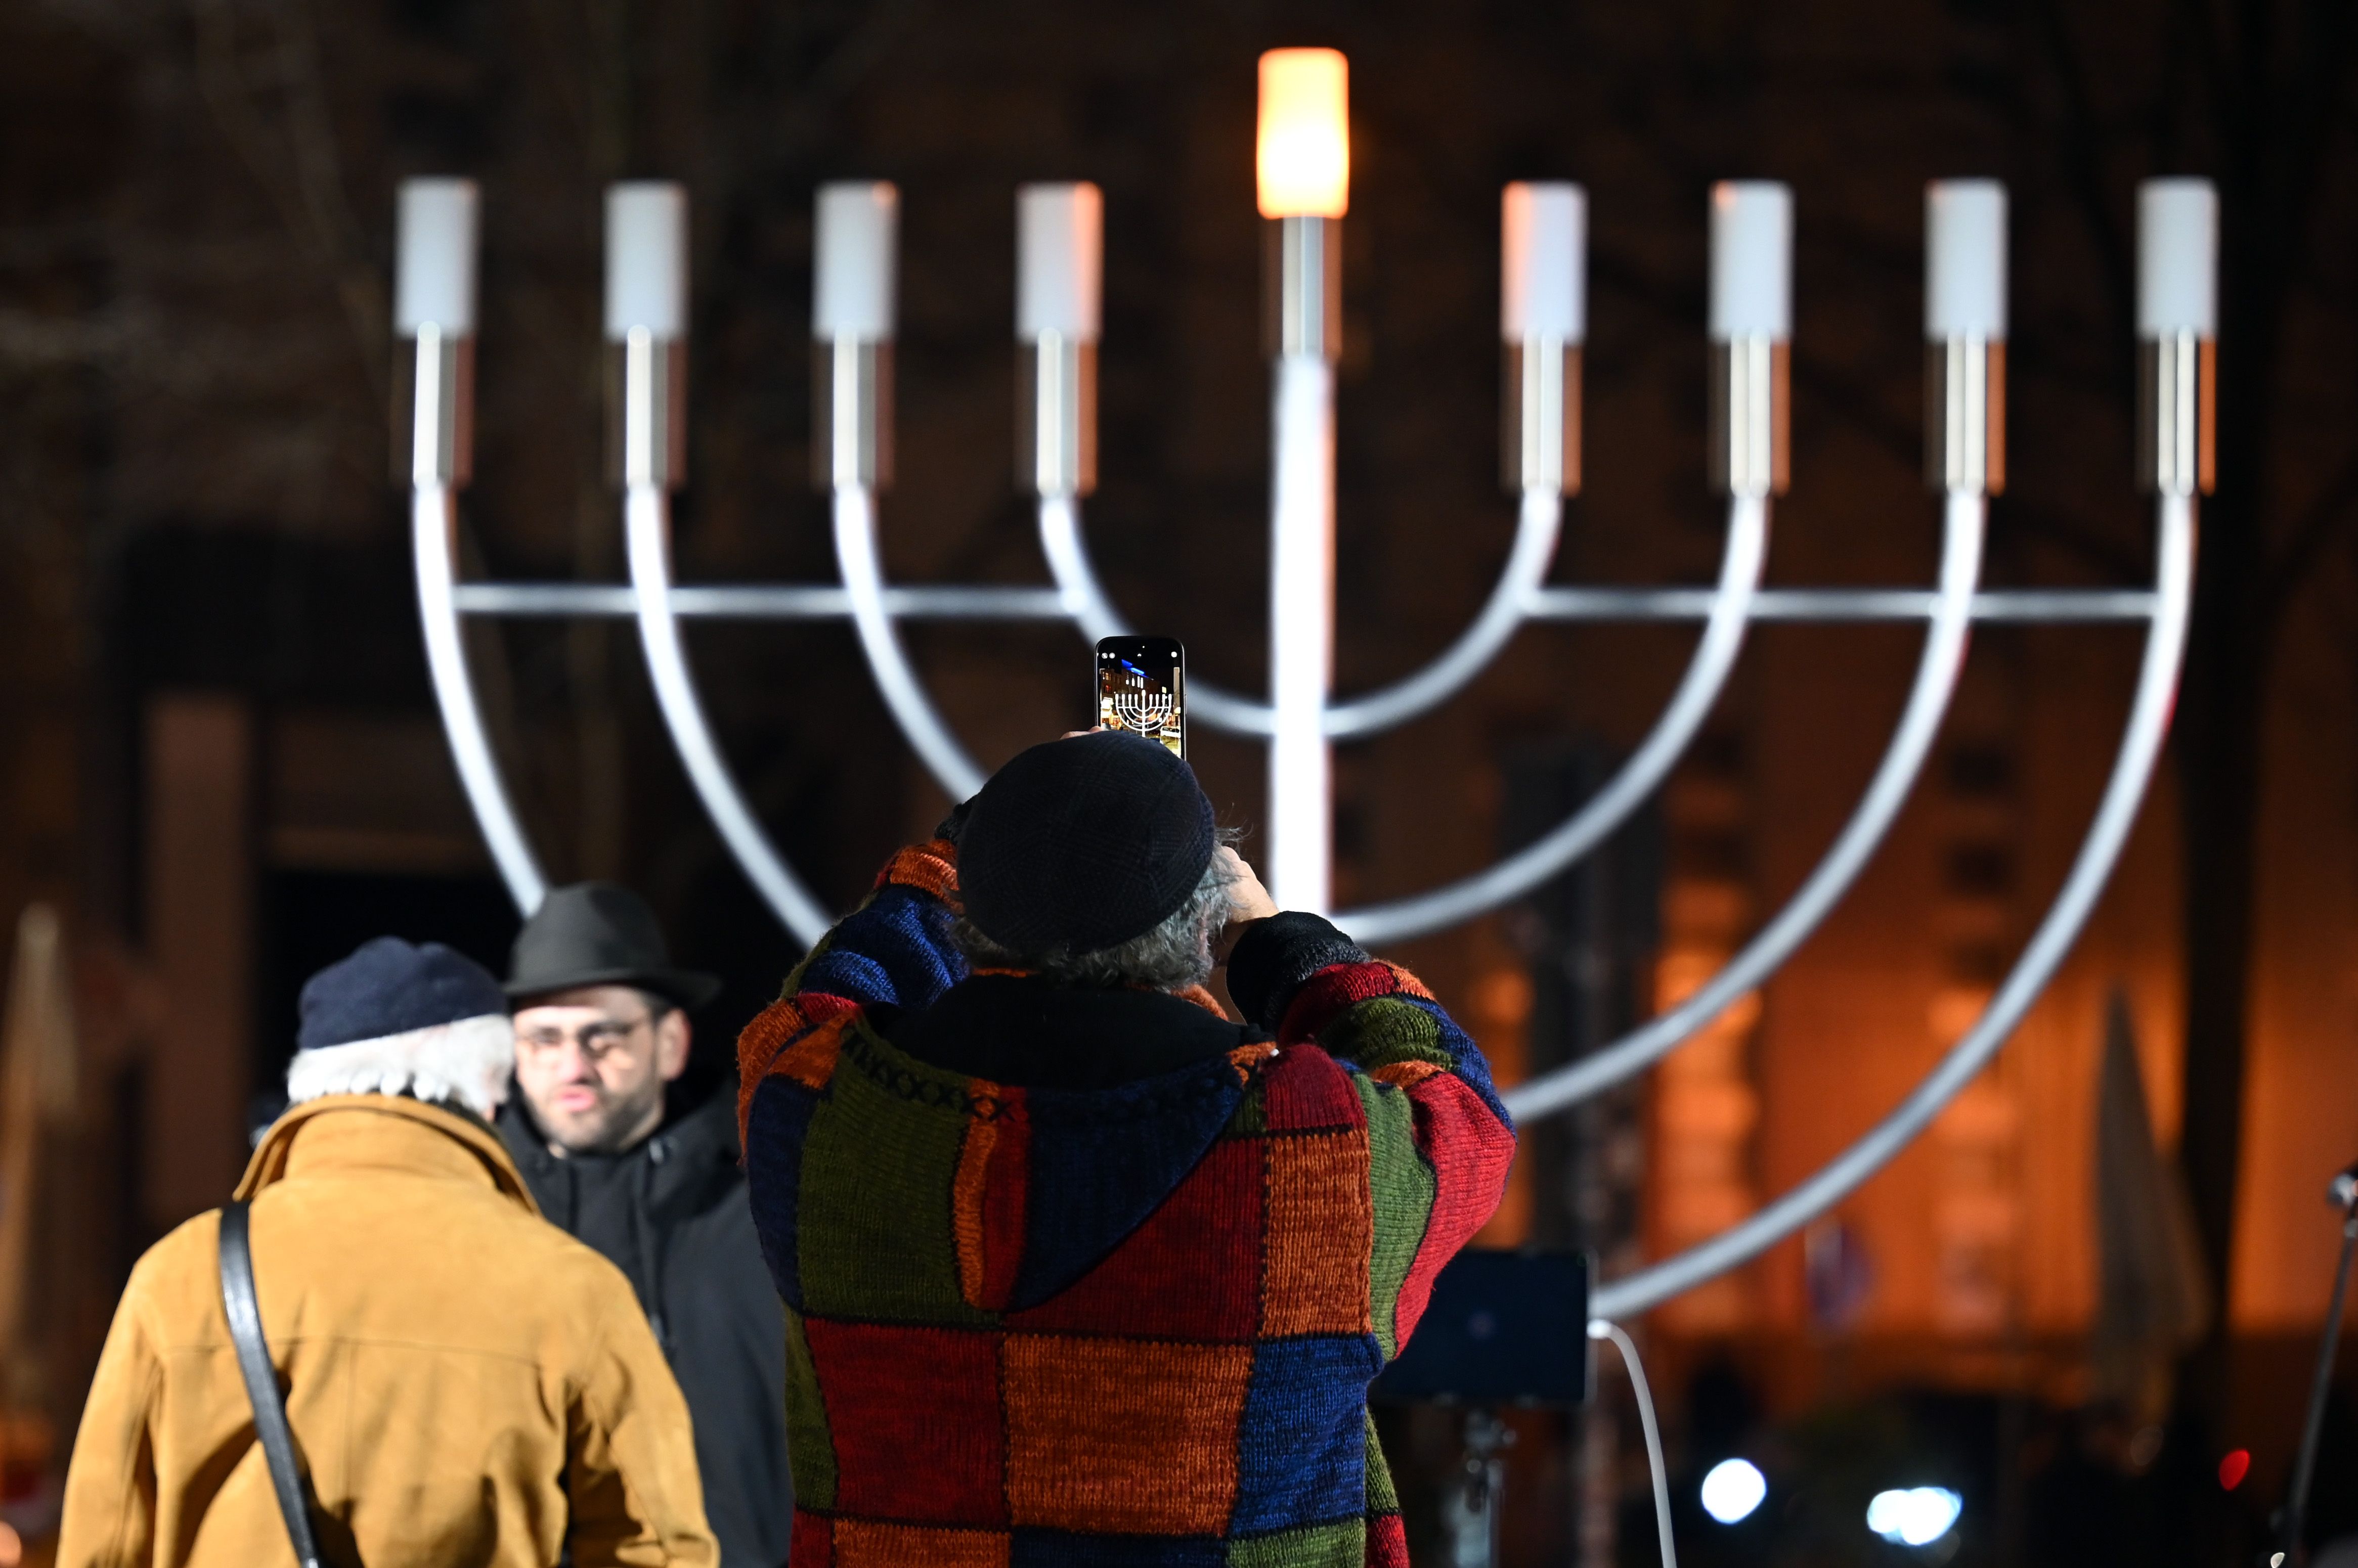 A man photographs the Hanukkah candelabra before the first light is lit in  Leipzig, Germany.